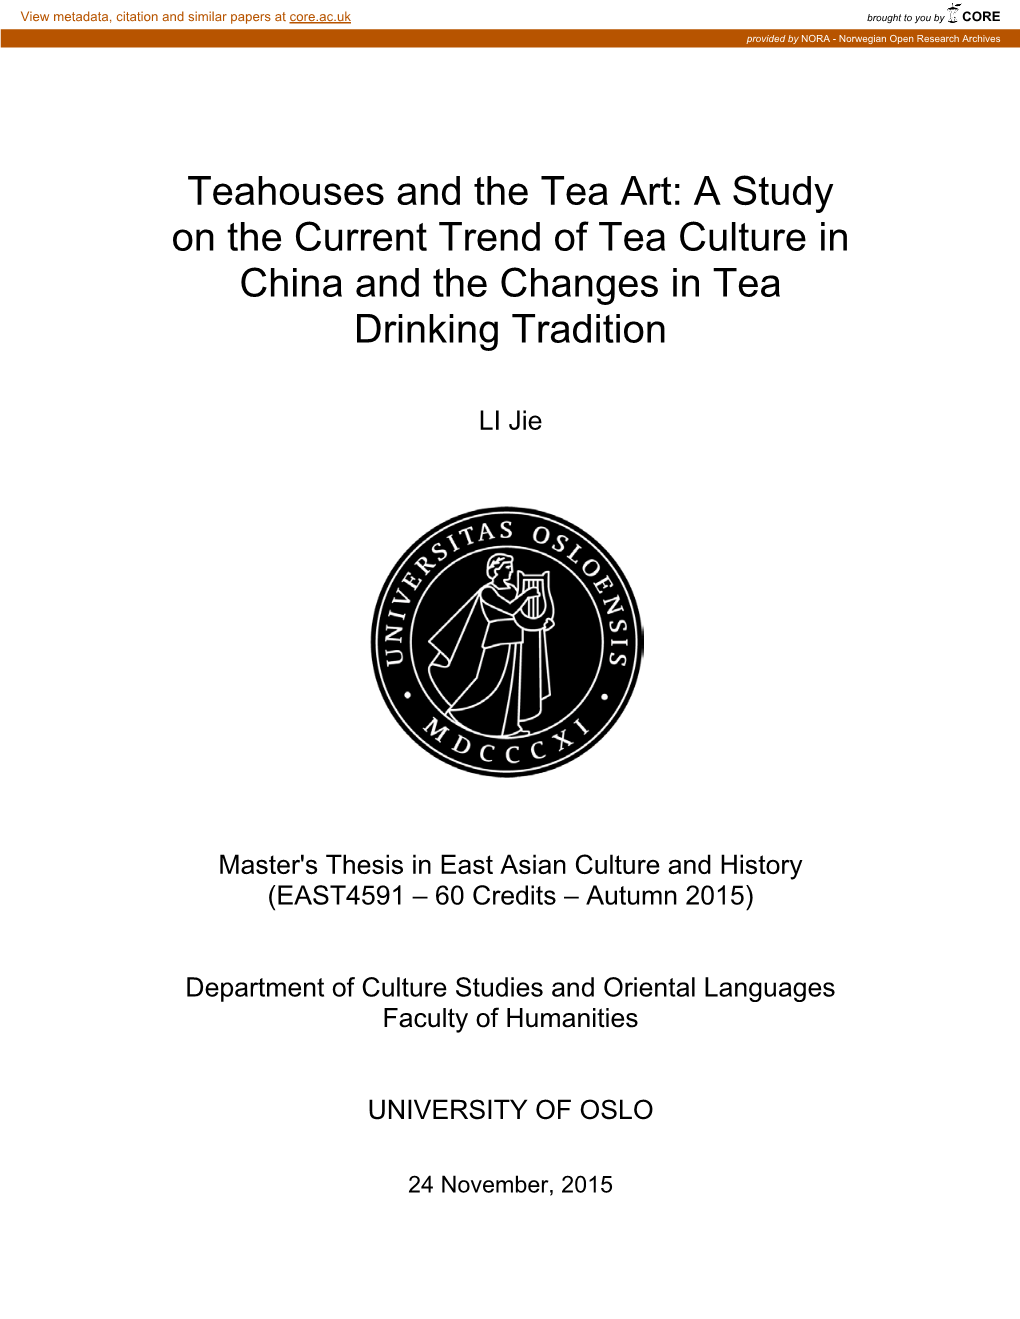 Teahouses and the Tea Art: a Study on the Current Trend of Tea Culture in China and the Changes in Tea Drinking Tradition